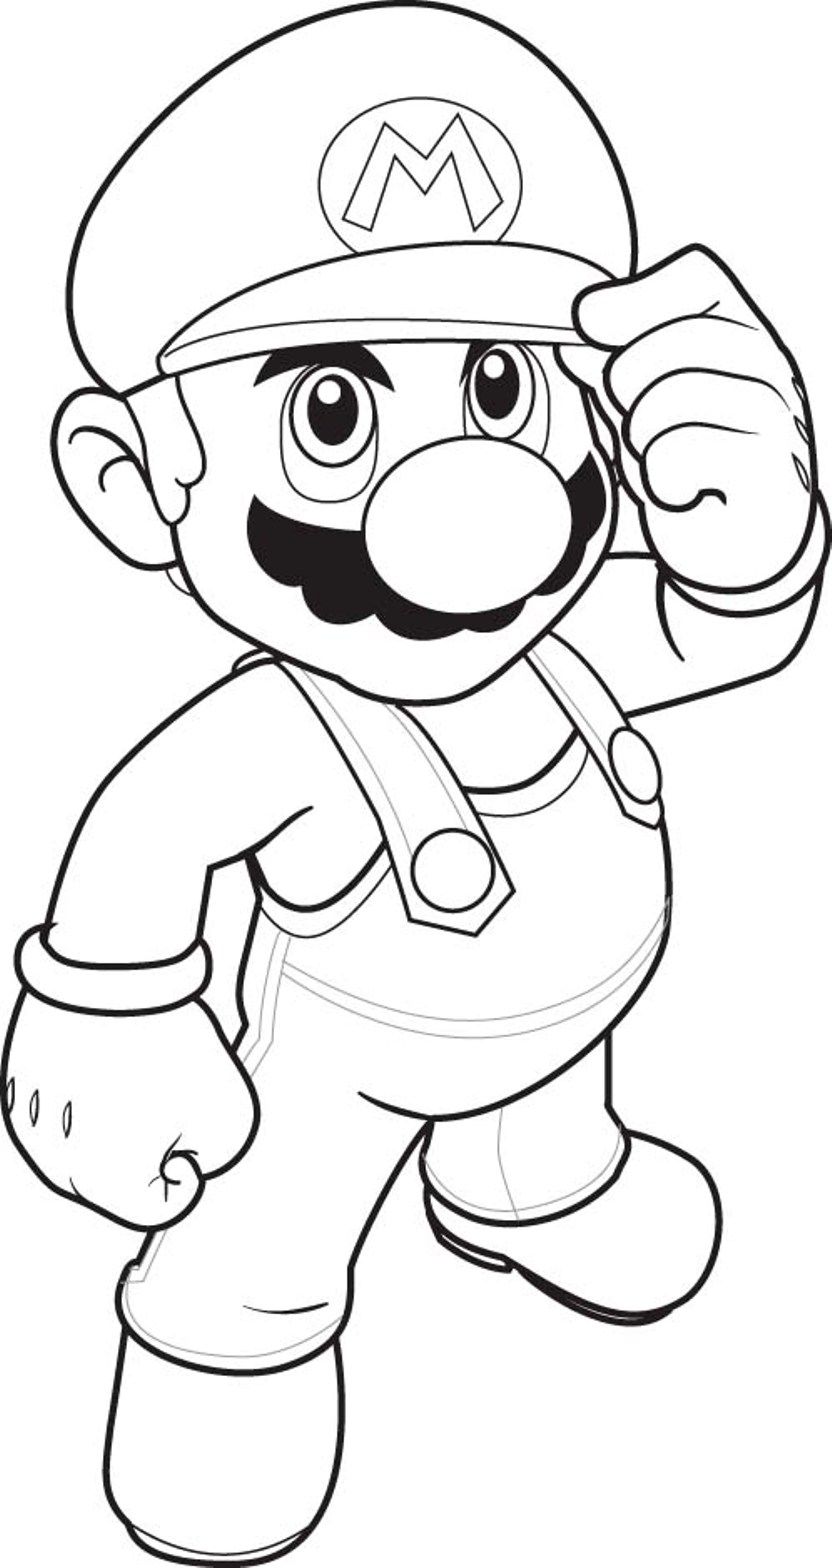 Mario Bros Coloring Pages | Cartoon Coloring pages of ...